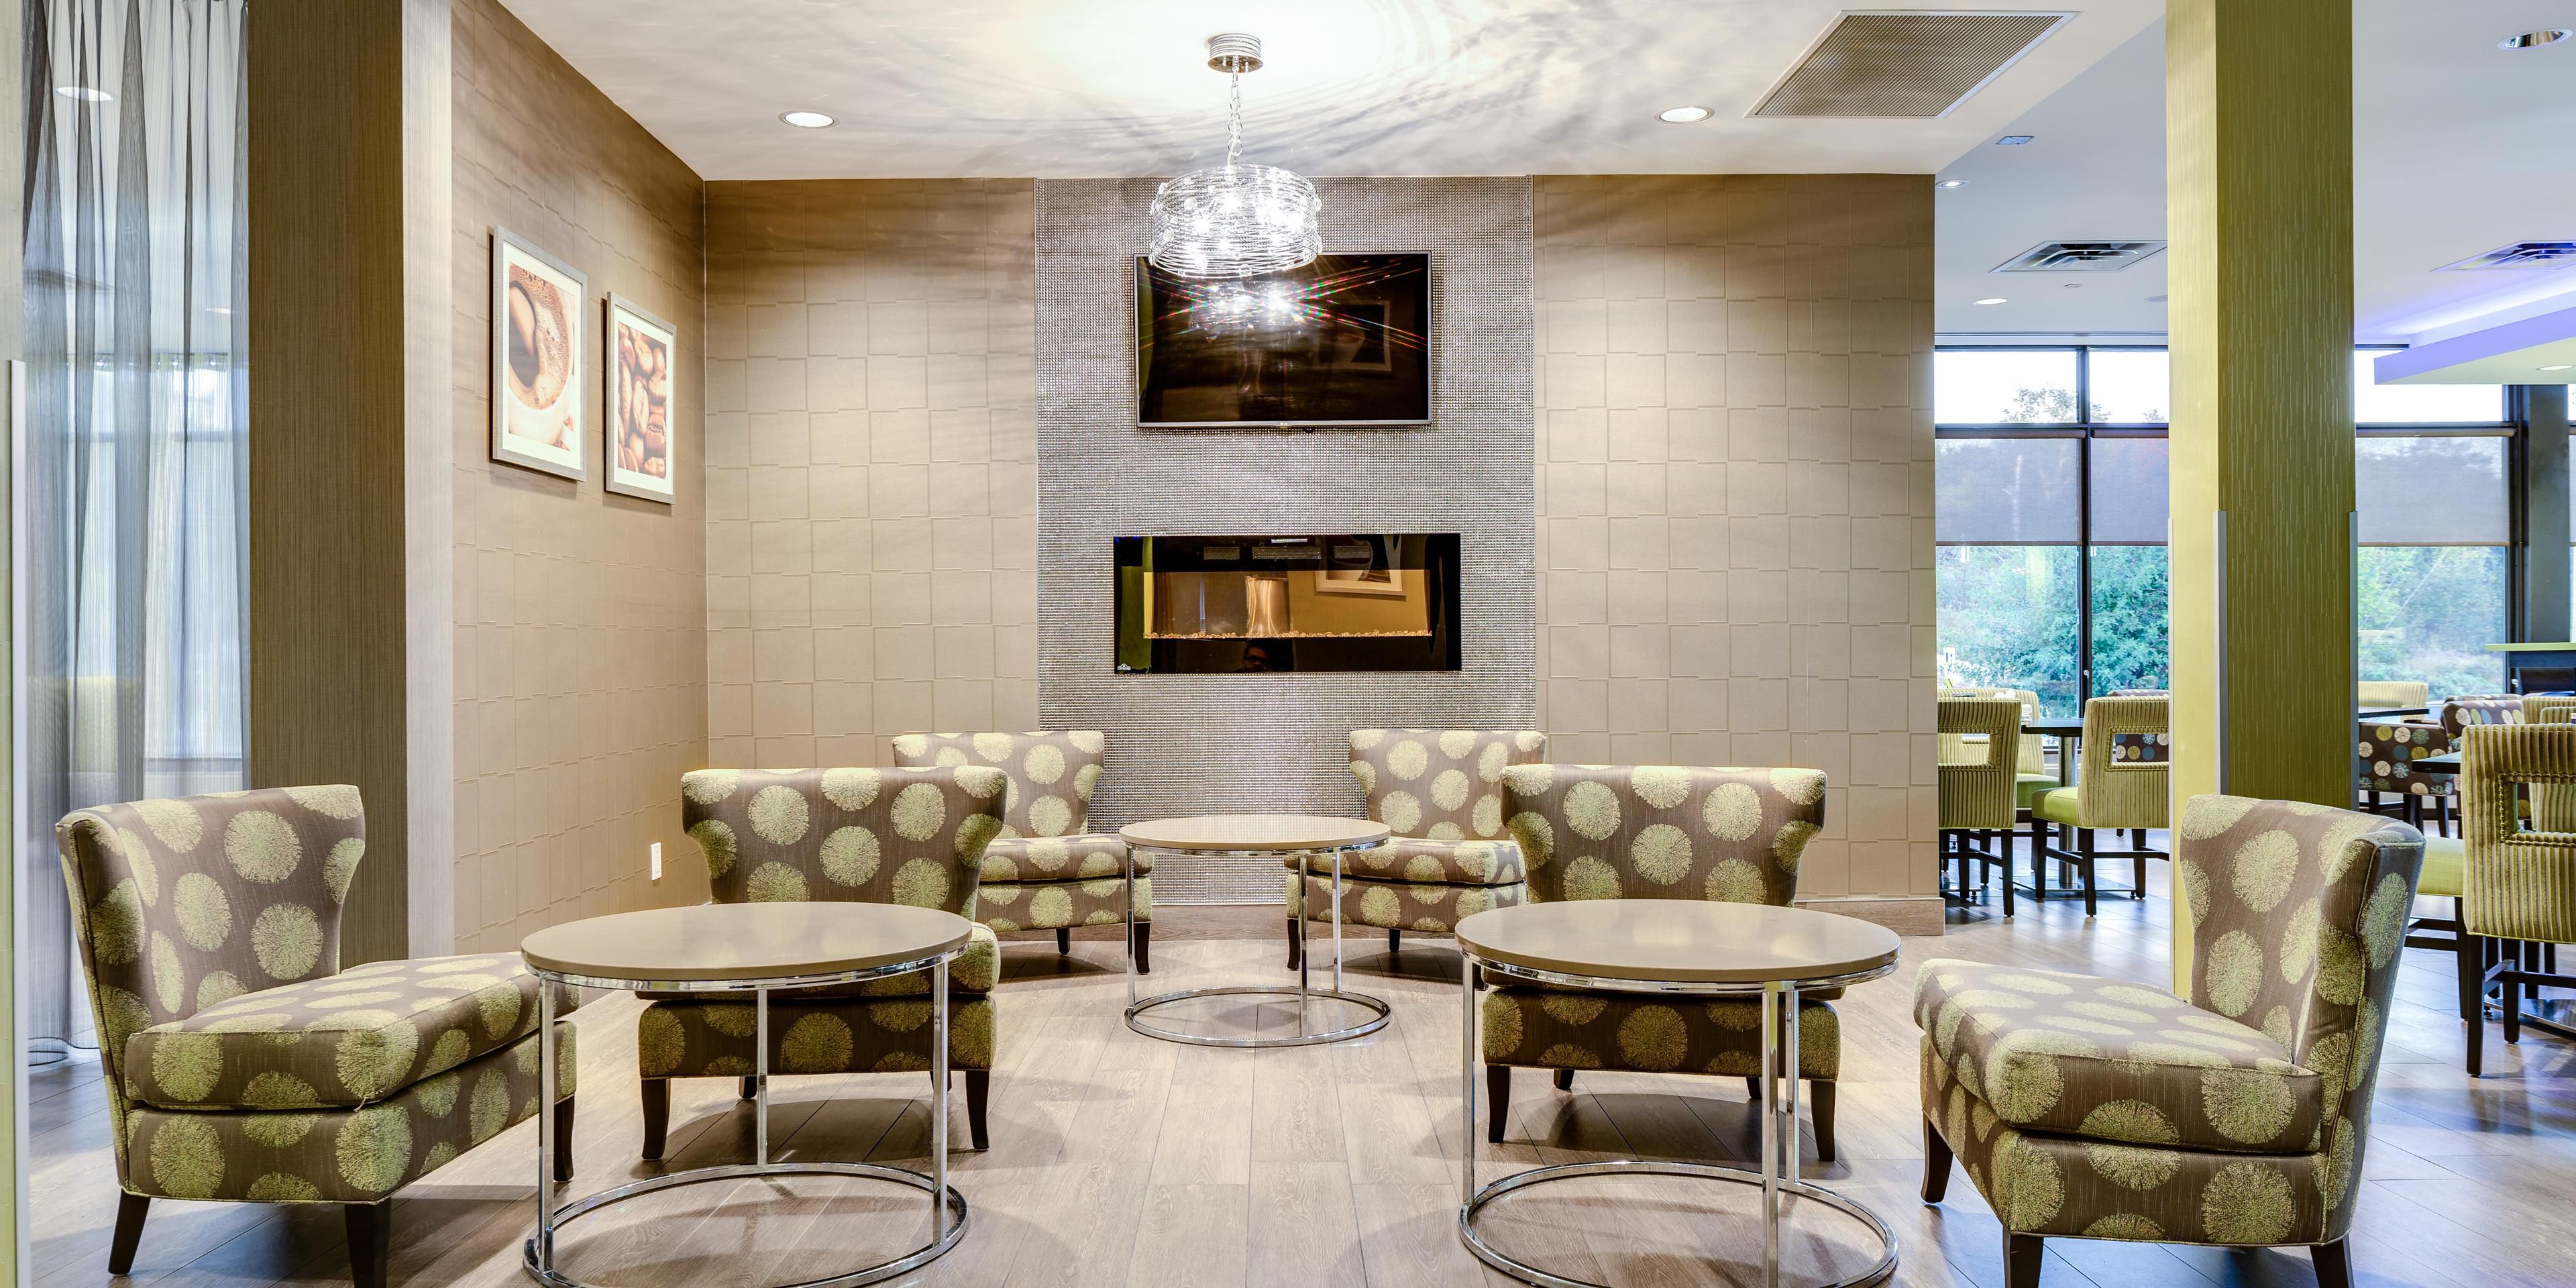 Relax By The Warm Fireplace at the Rendezvous Lounge